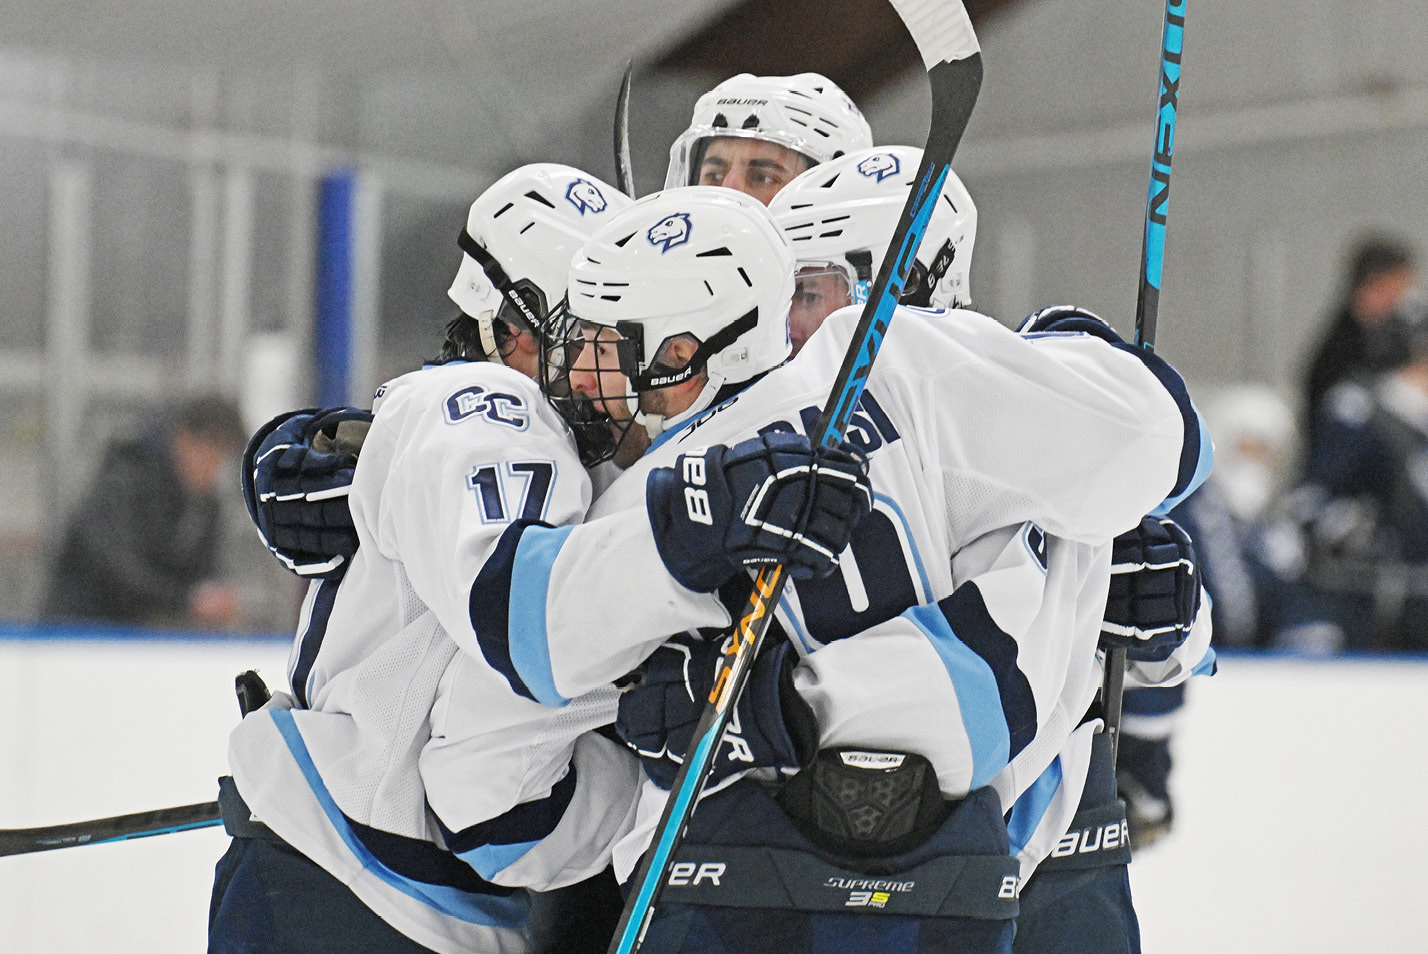 Men's hockey players huddle in celebration after a goal.